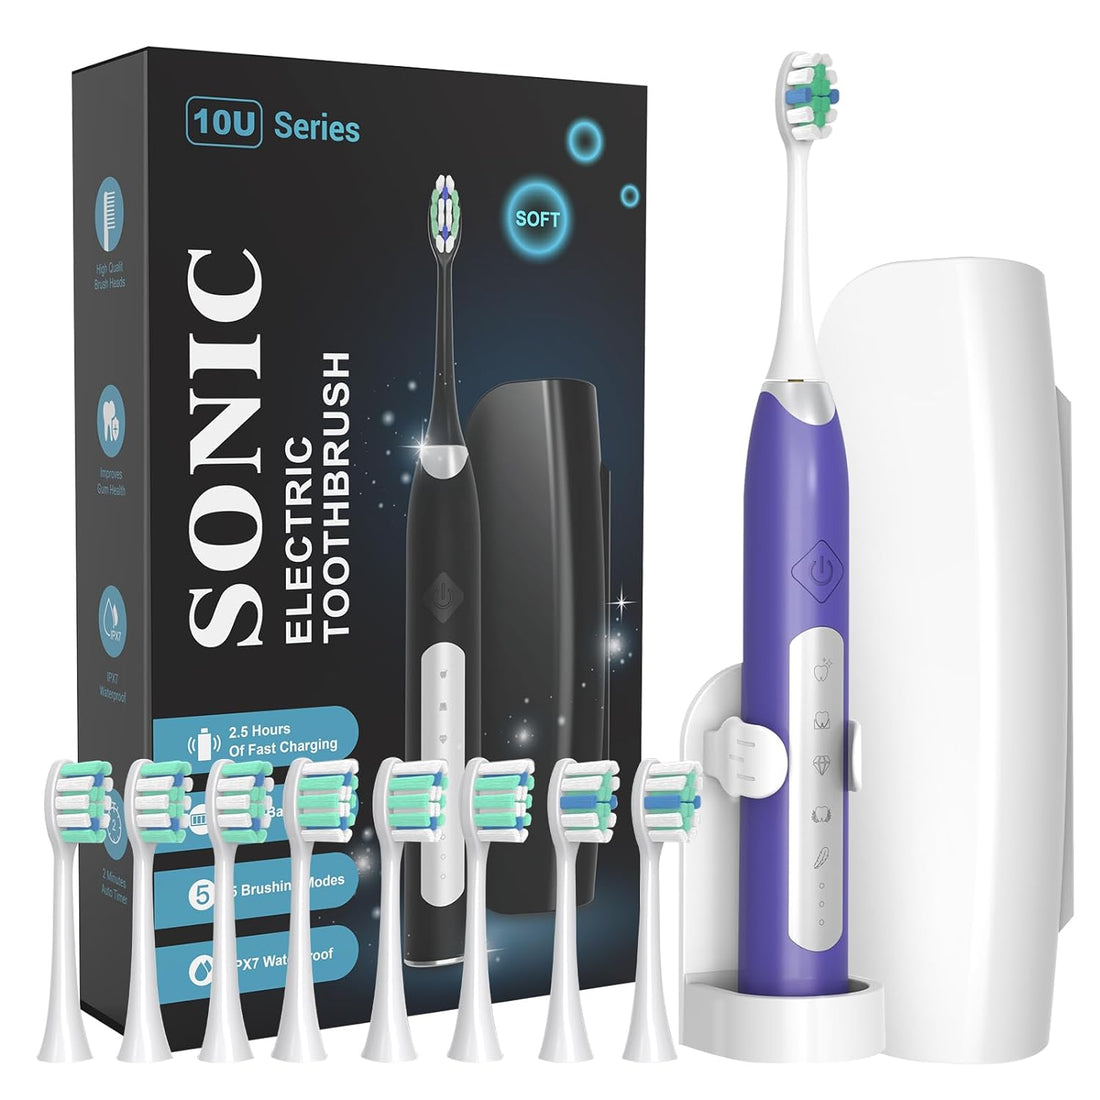 Sonic Electric Toothbrushes for Adults, 8 Brush Heads Electric Toothbrush Deep Clean 5 Modes, Rechargeable Travel Toothbrushes Fast Charge with 2 Minutes Smart Timer (Deep Purple)